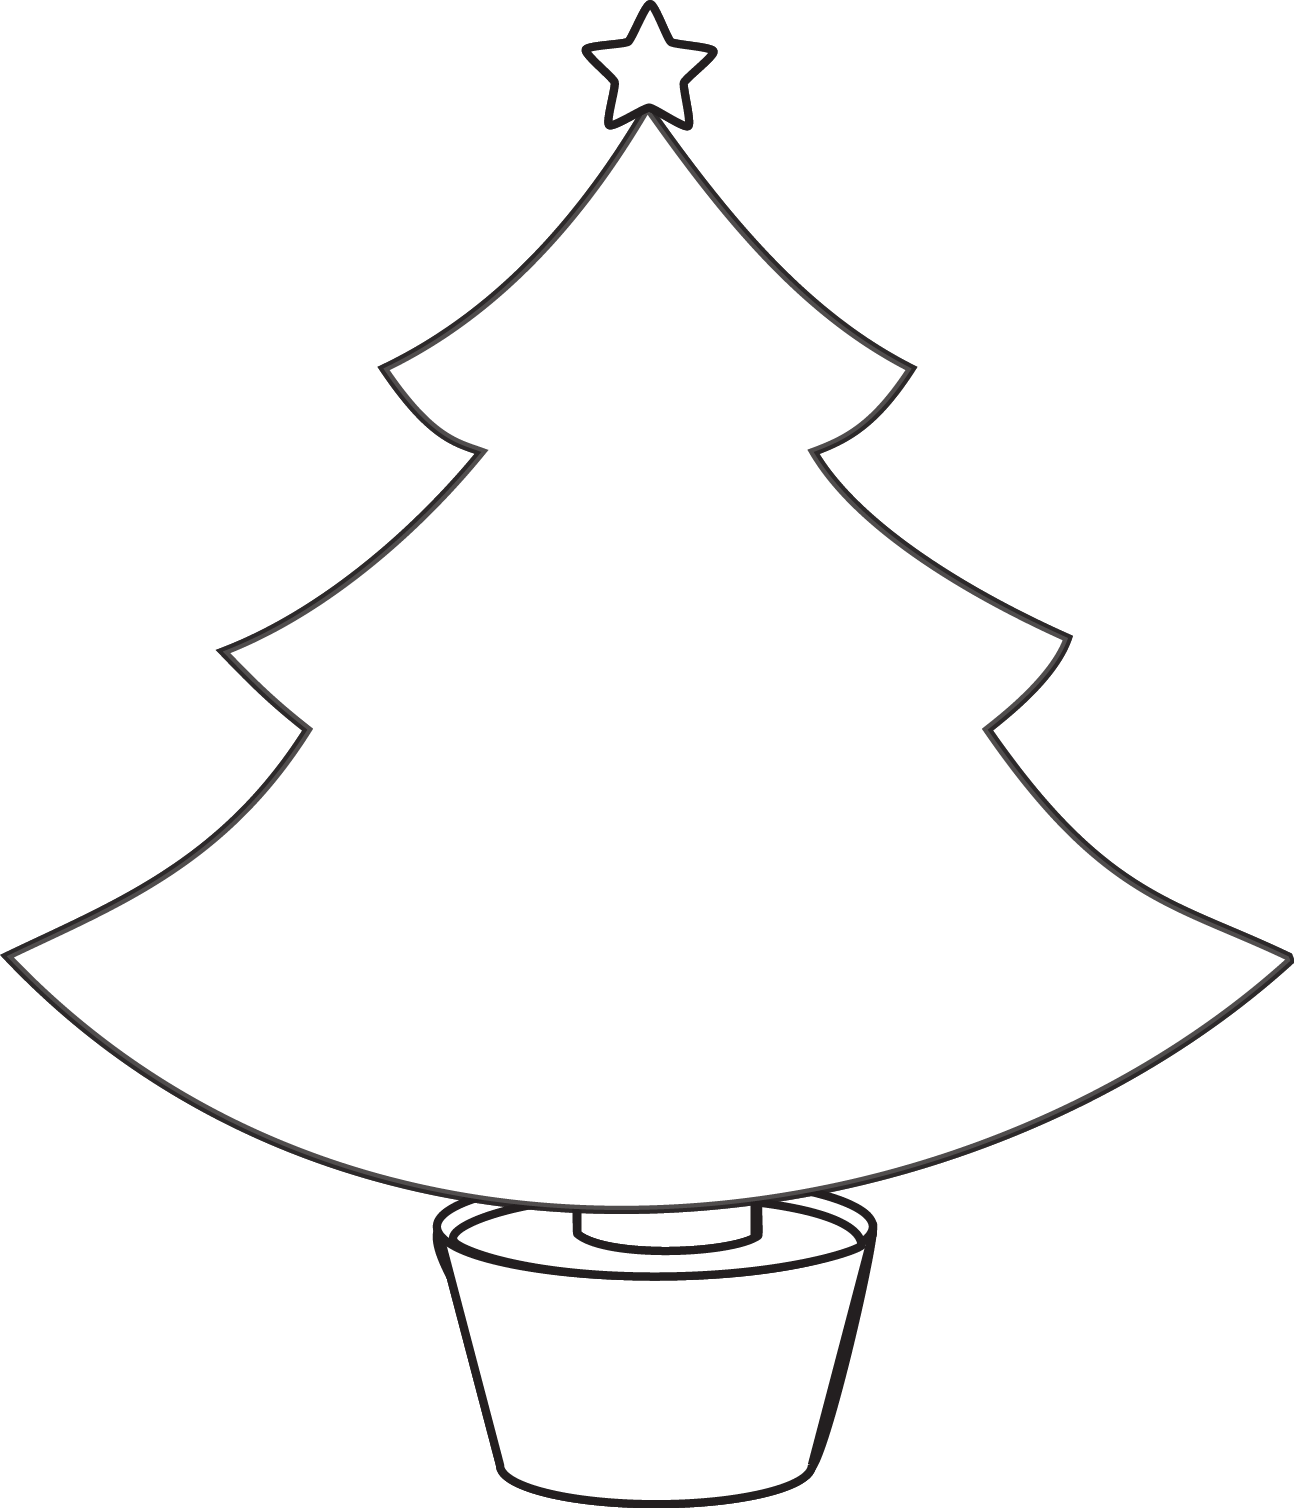 Cool Christmas Tree Stencil 16 Coloring Page